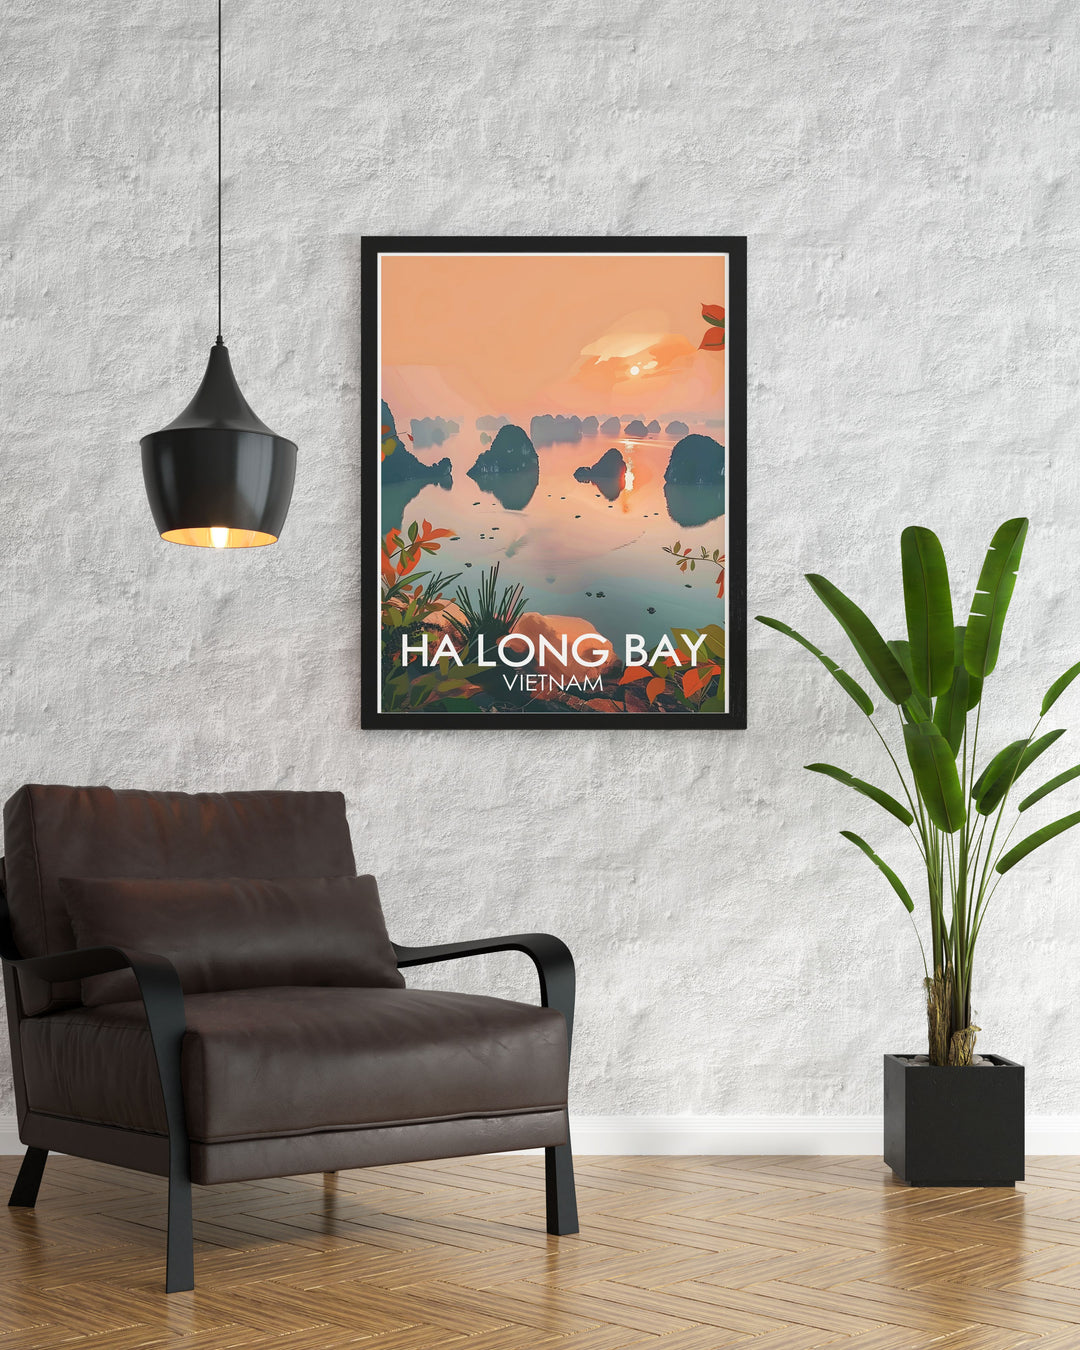 Highlighting the unique rock formations and emerald waters of Ha Long Bay, this travel poster captures the captivating landscapes and adventurous spirit of the region, ideal for your home decor.